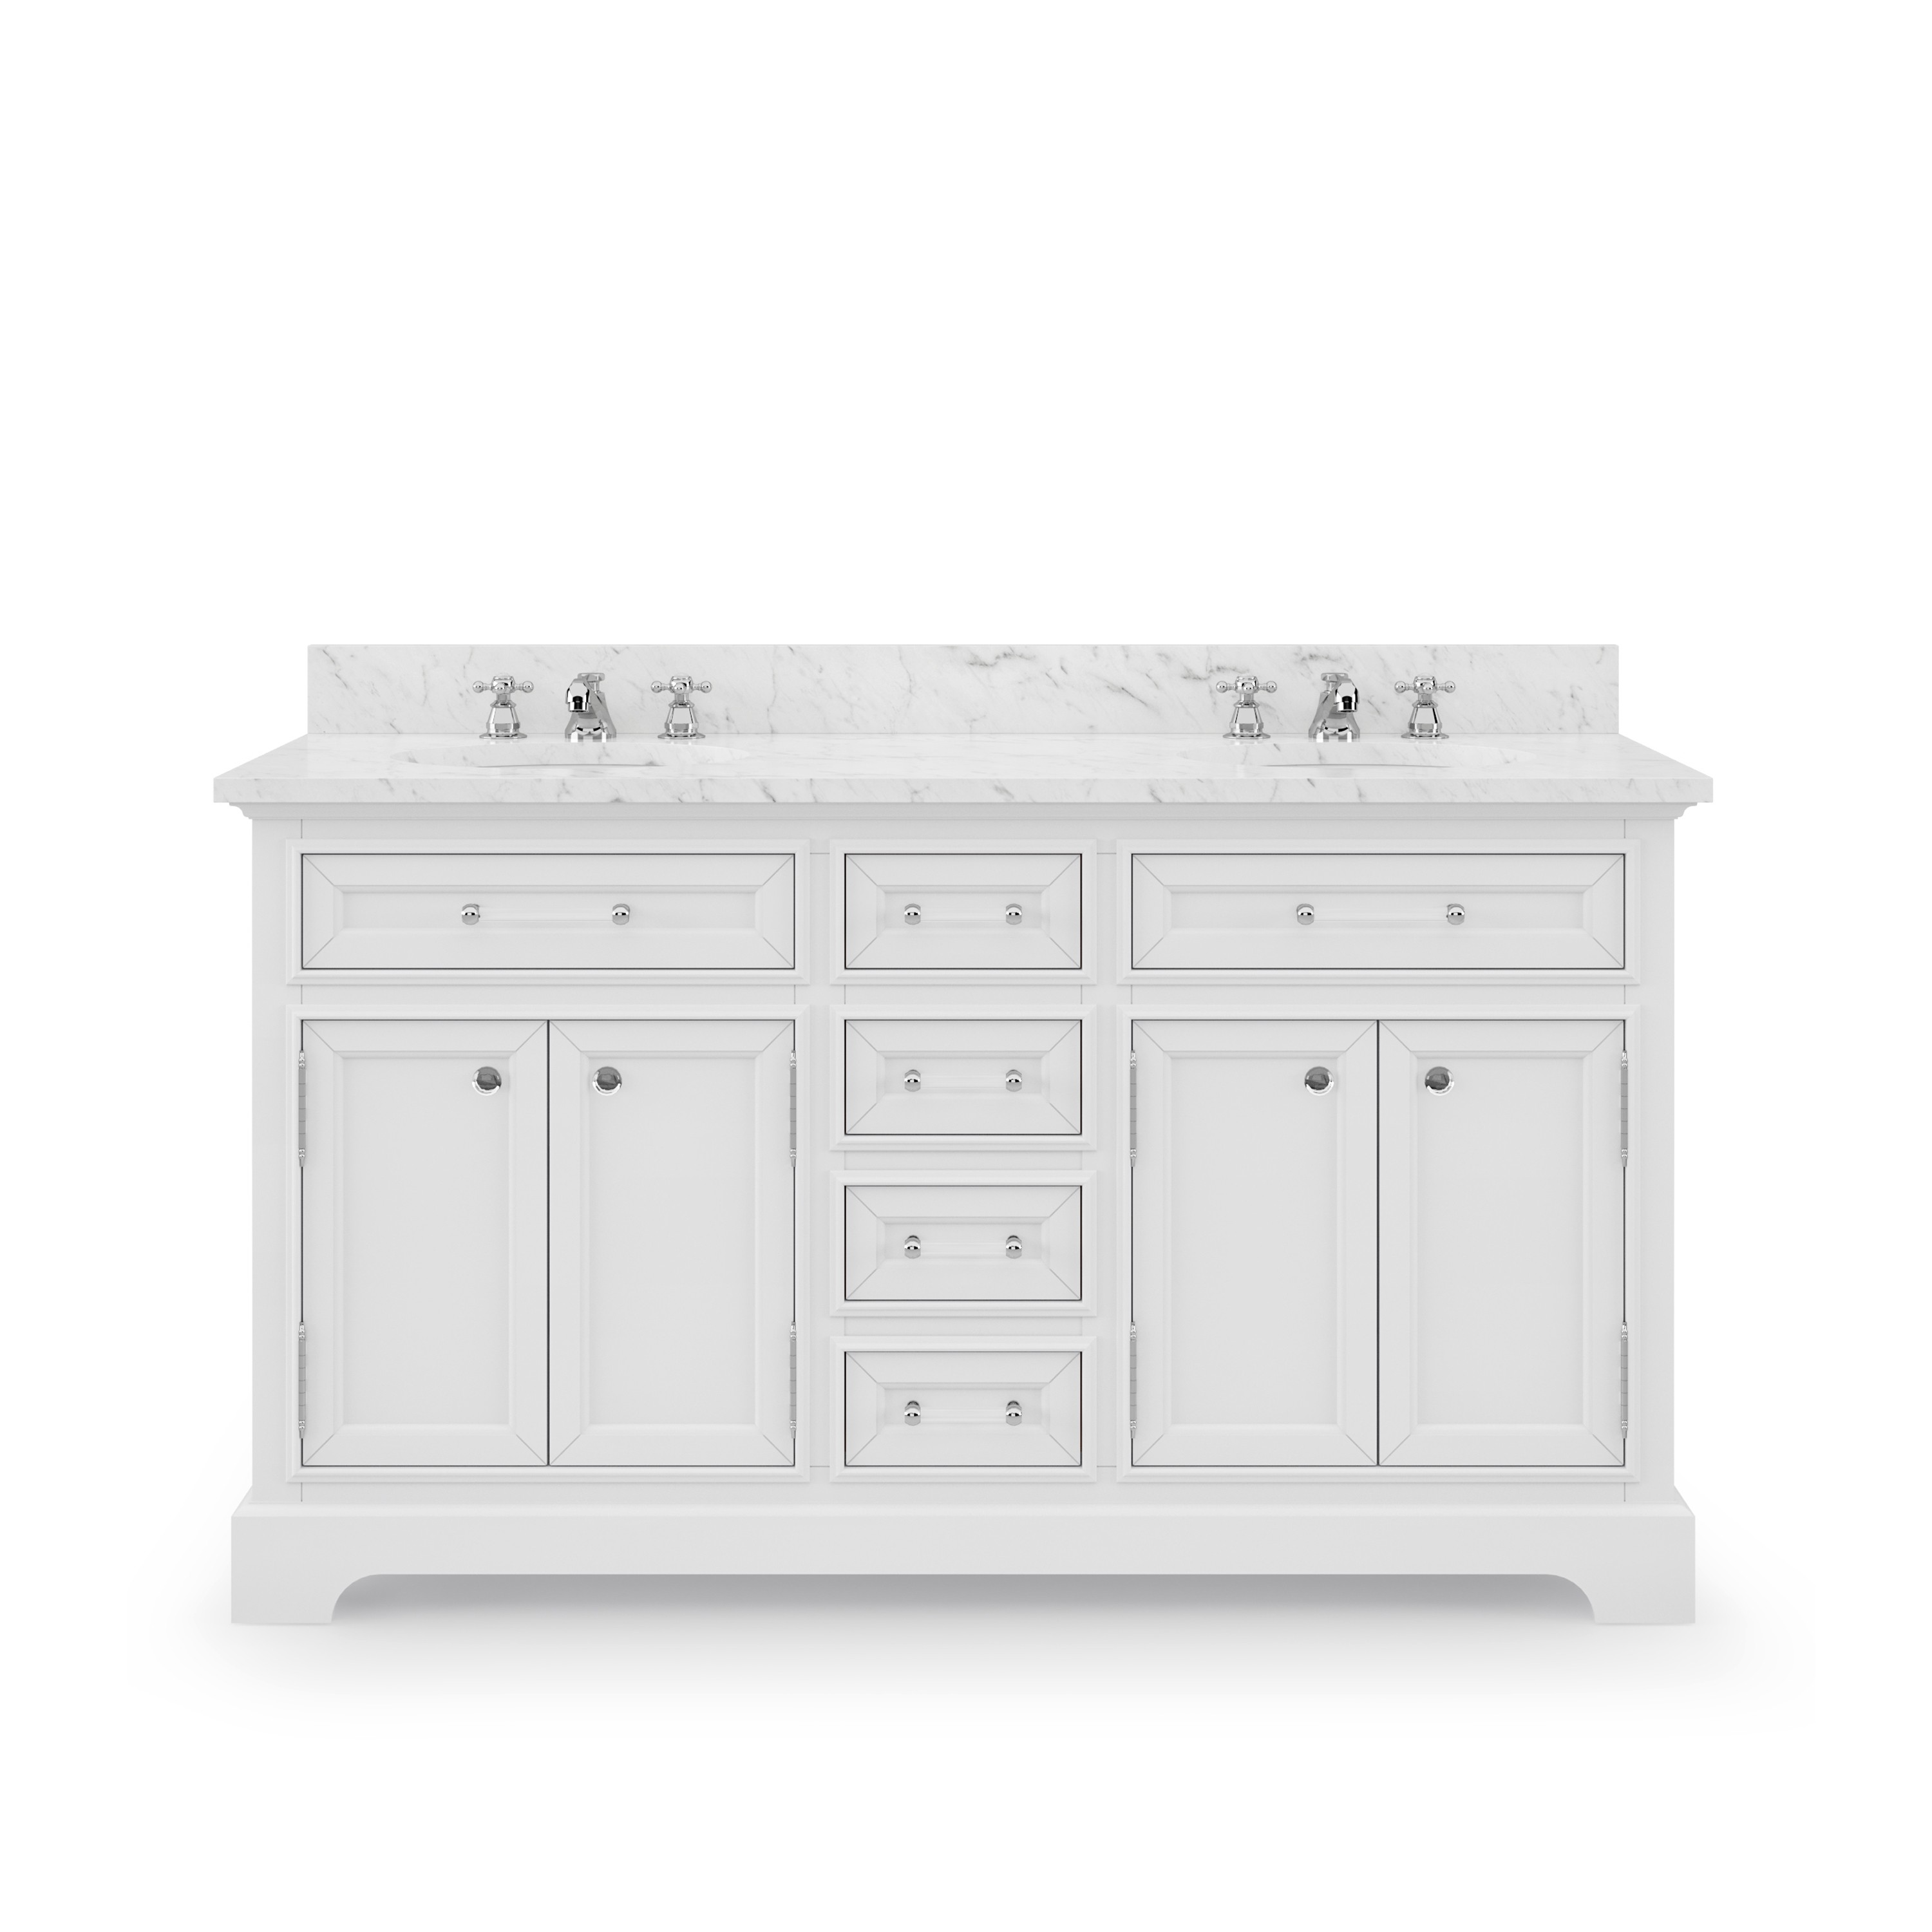 WATER-CREATION DE60CW01PW-000BX0901 DERBY 60 INCH PURE WHITE DOUBLE SINK BATHROOM VANITY WITH FAUCET